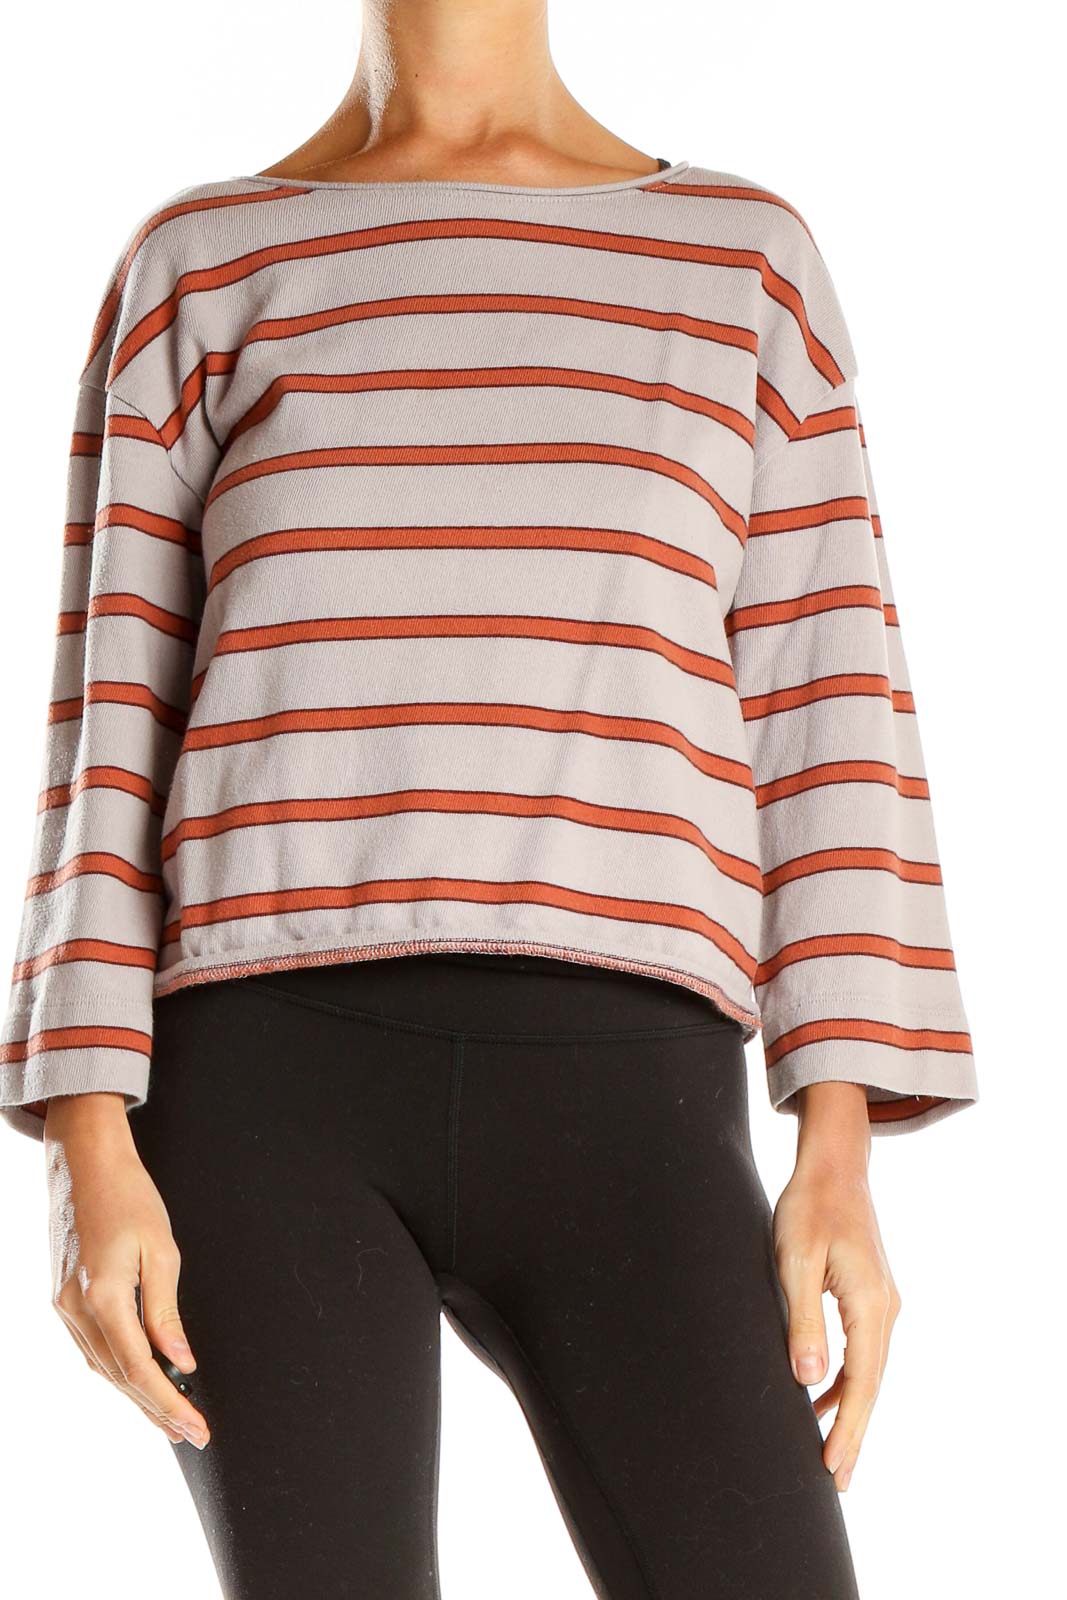 Gray Red Striped Bell Sleeve Crop Top Front